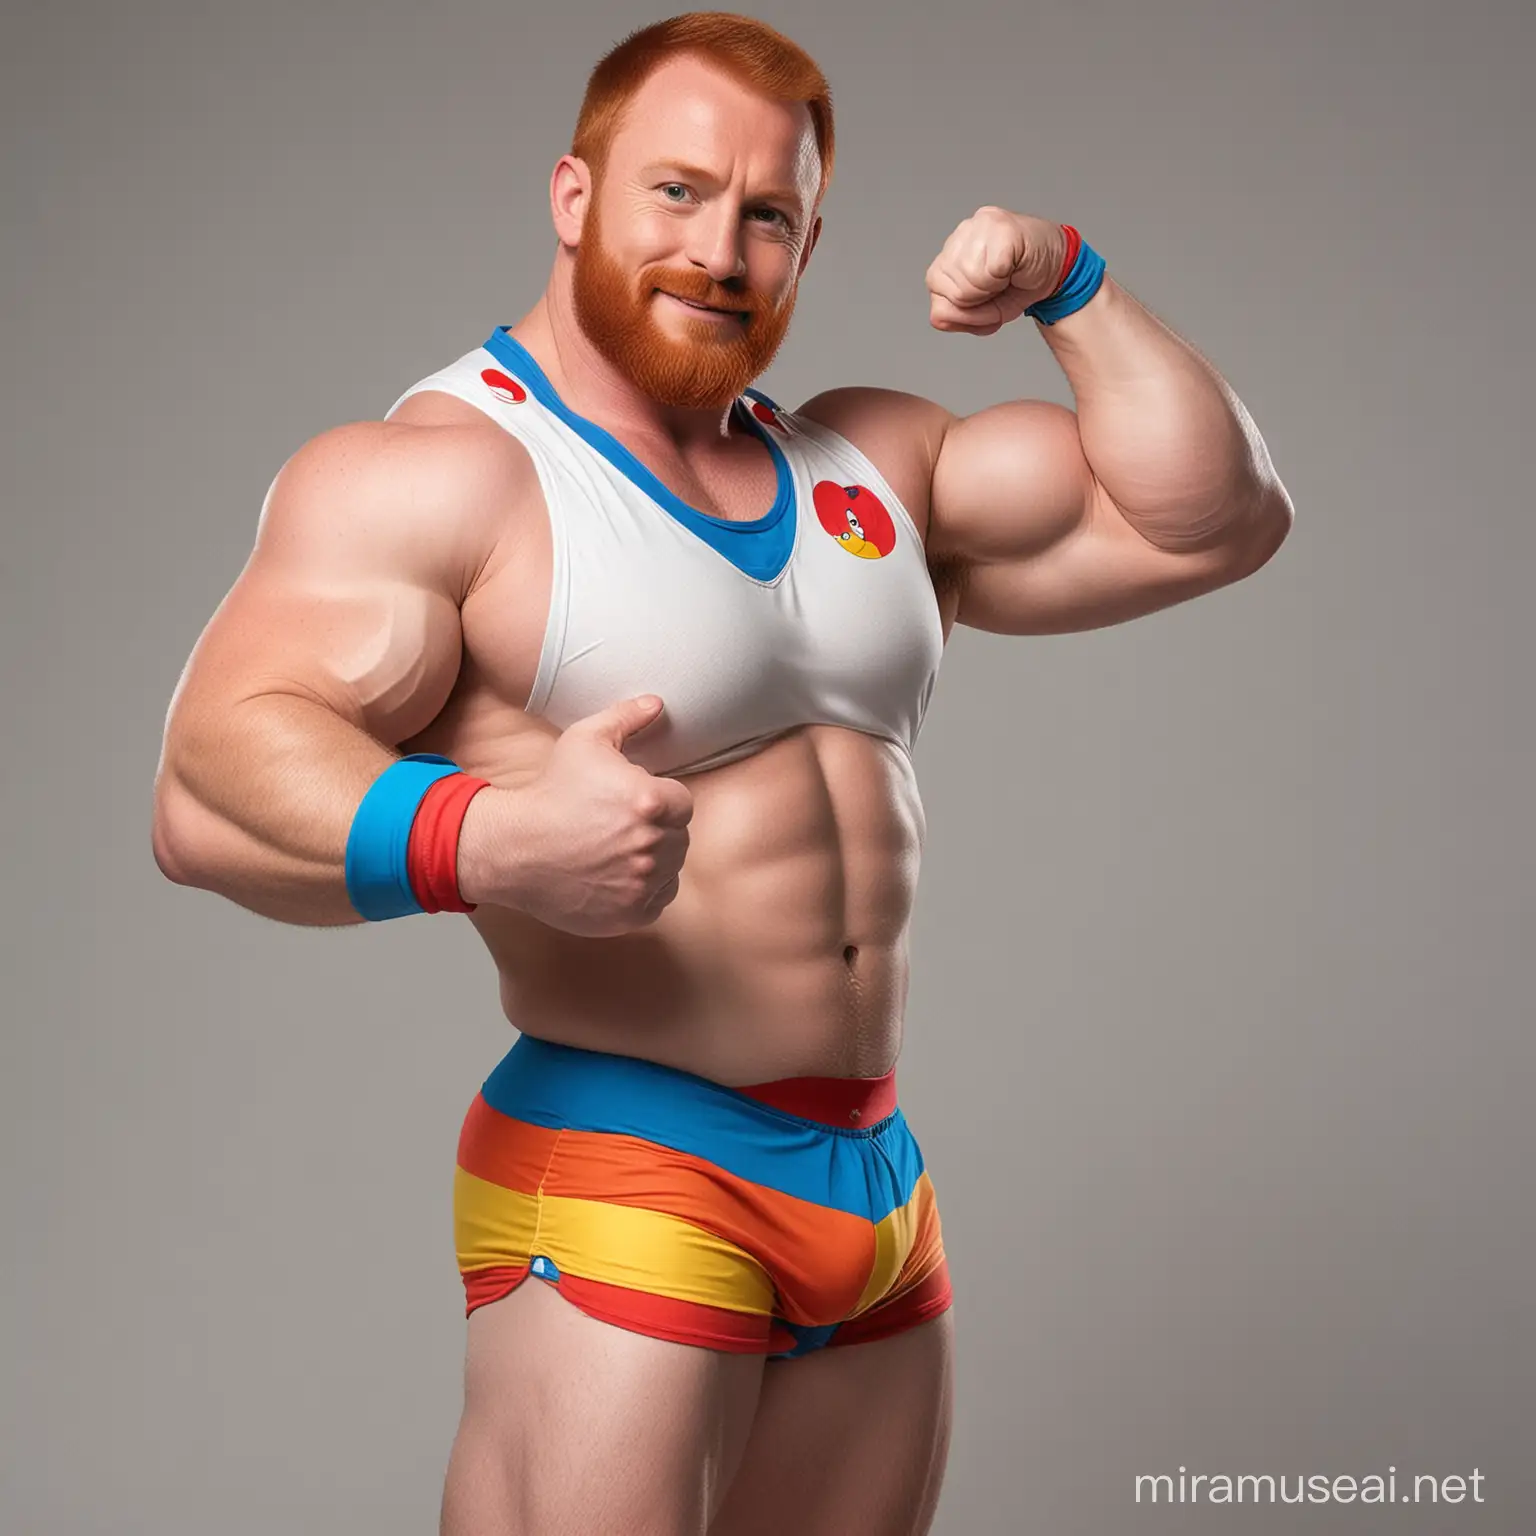 Topless Beefy Charming 30s Red Head IFBB Muscled Daddy wearing unzipped Space Jacket Vest Mixed Rainbow Coloured Short Shorts Flexing his Big Strong Arm holding Doraemon